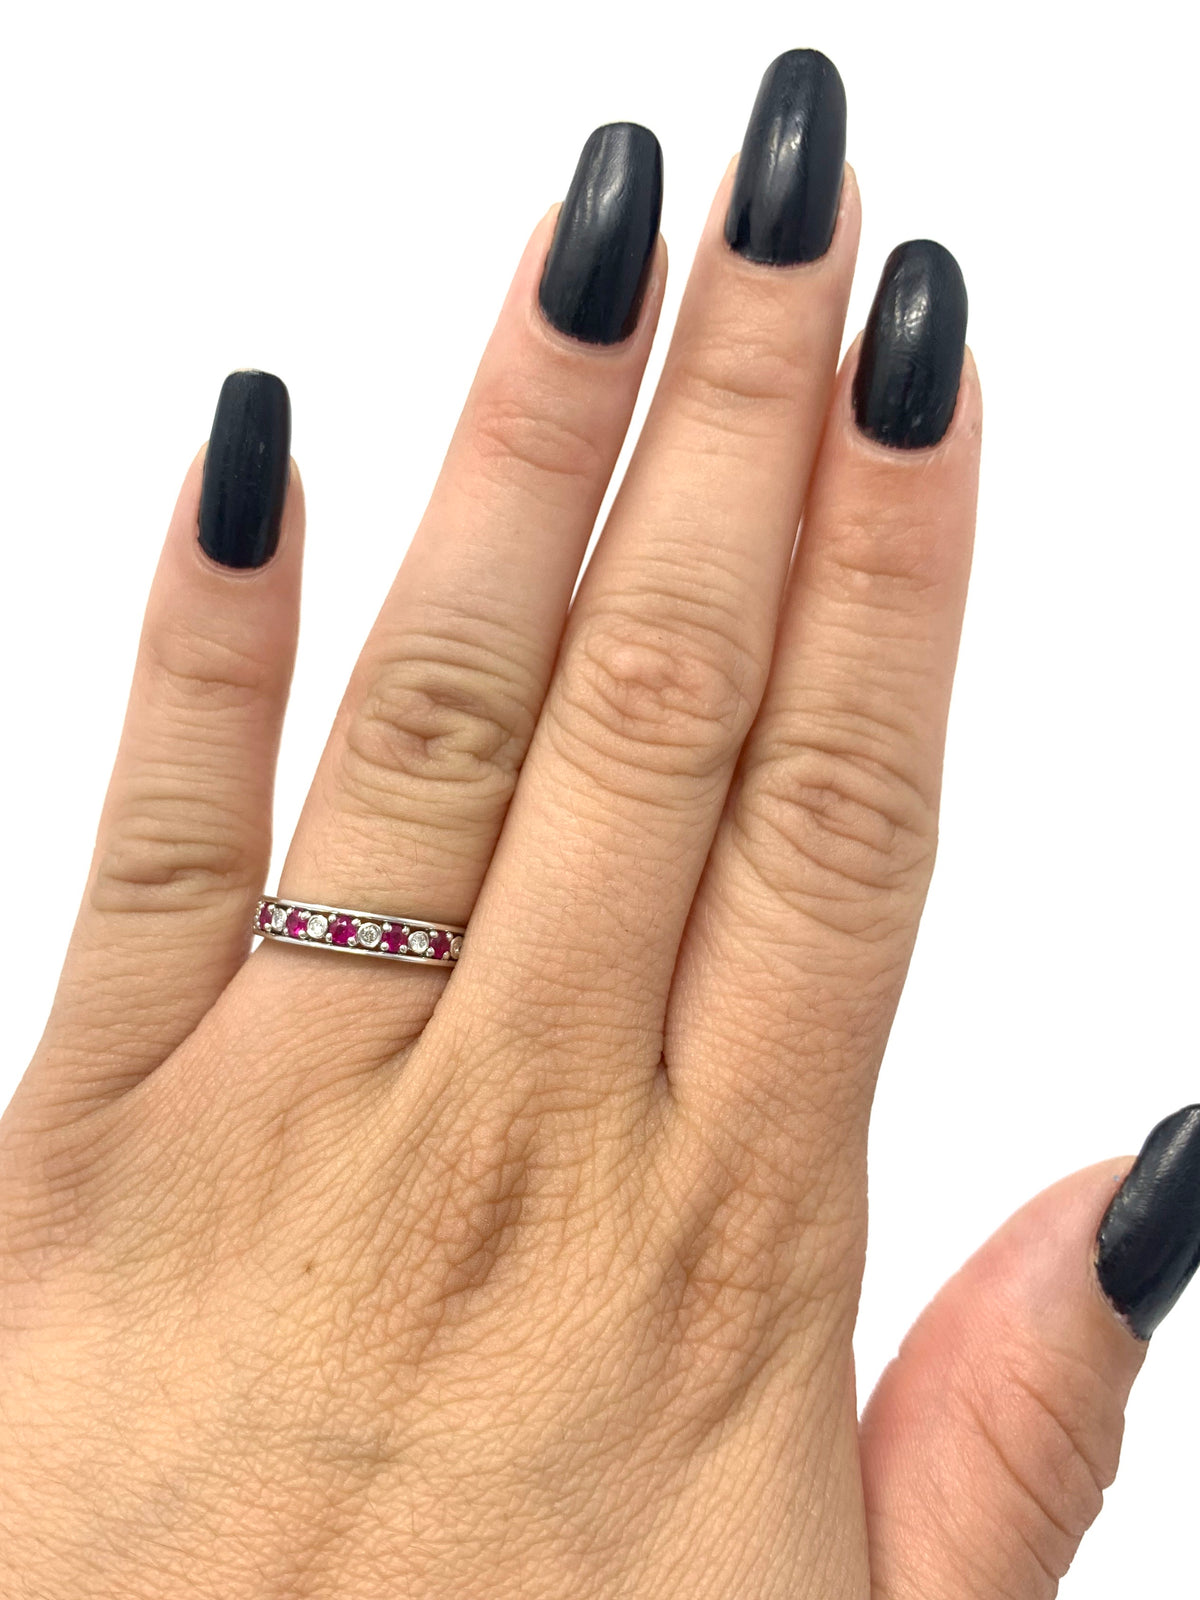 14K White Gold Ruby and Diamond Ring- Size 6.5